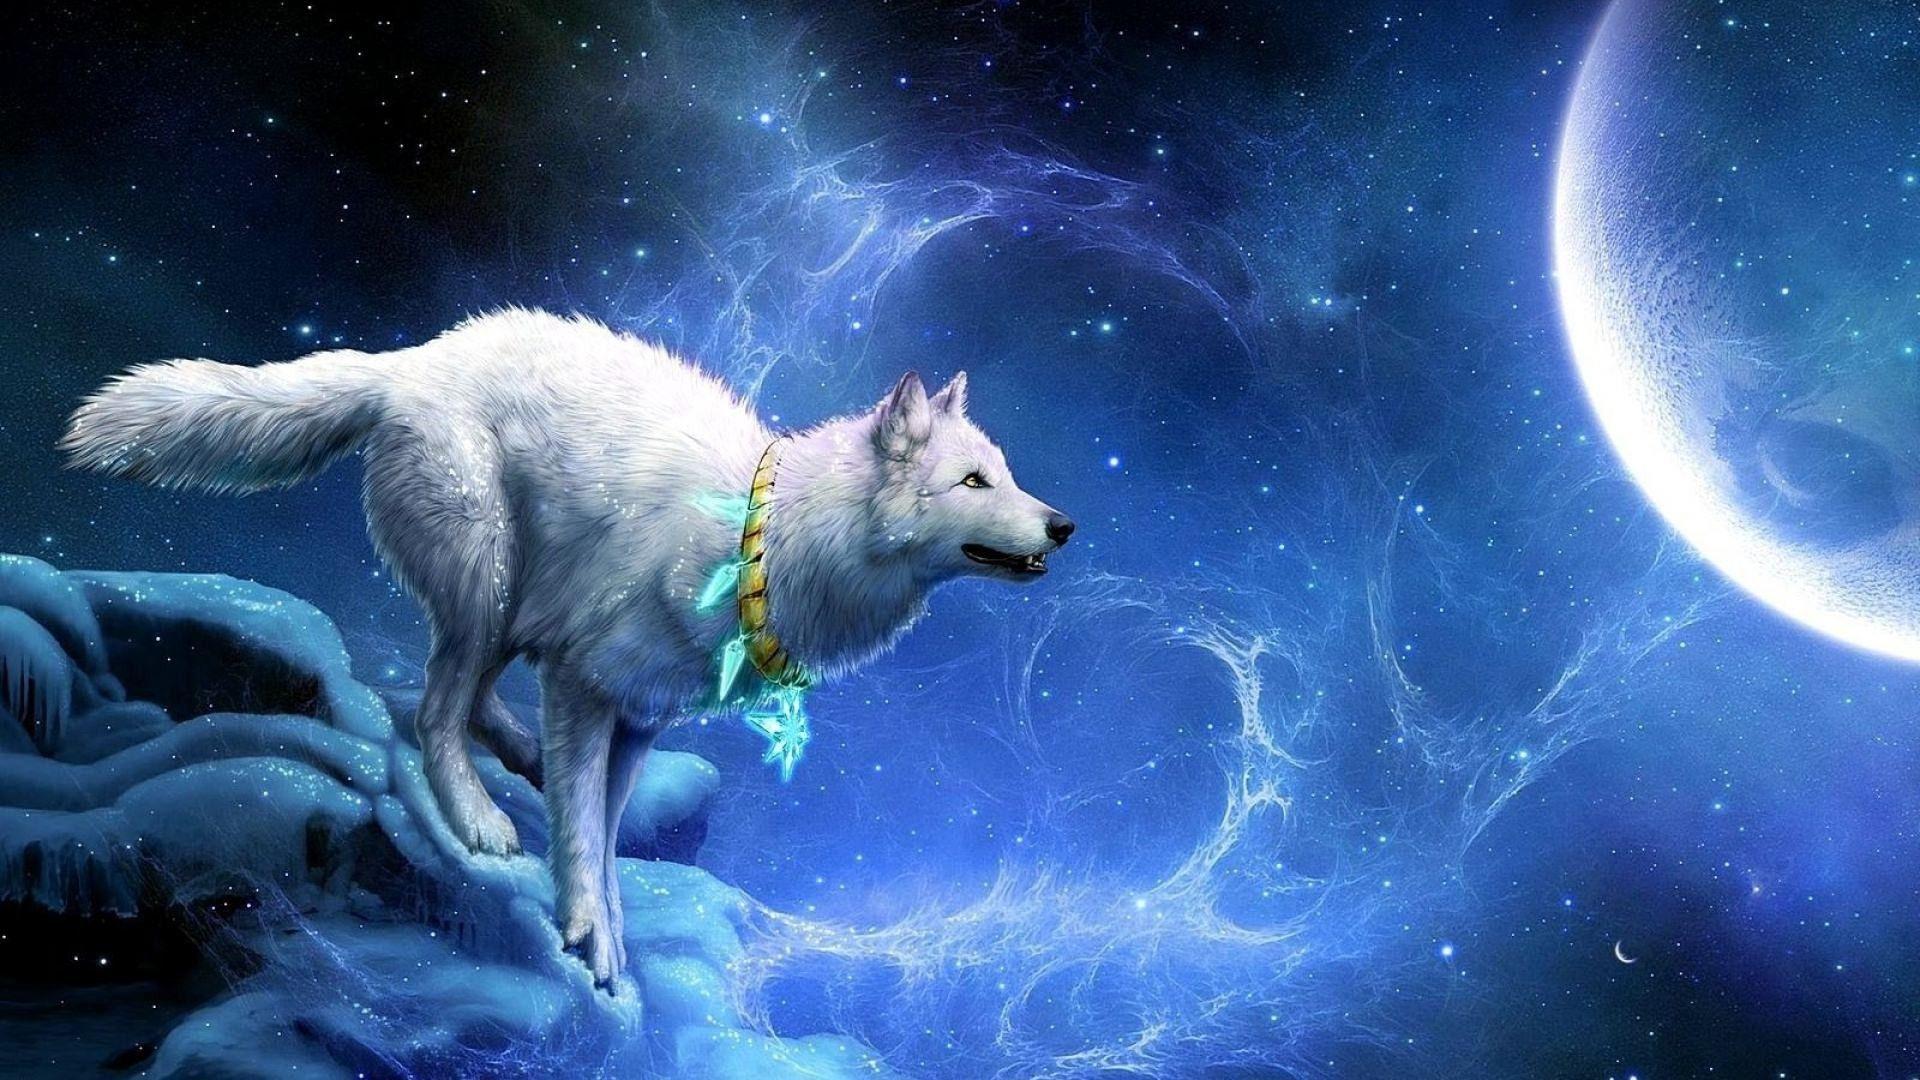 Galaxy Wolf HD Wallpapers 1000 Free Galaxy Wolf Wallpaper Images For All  Devices